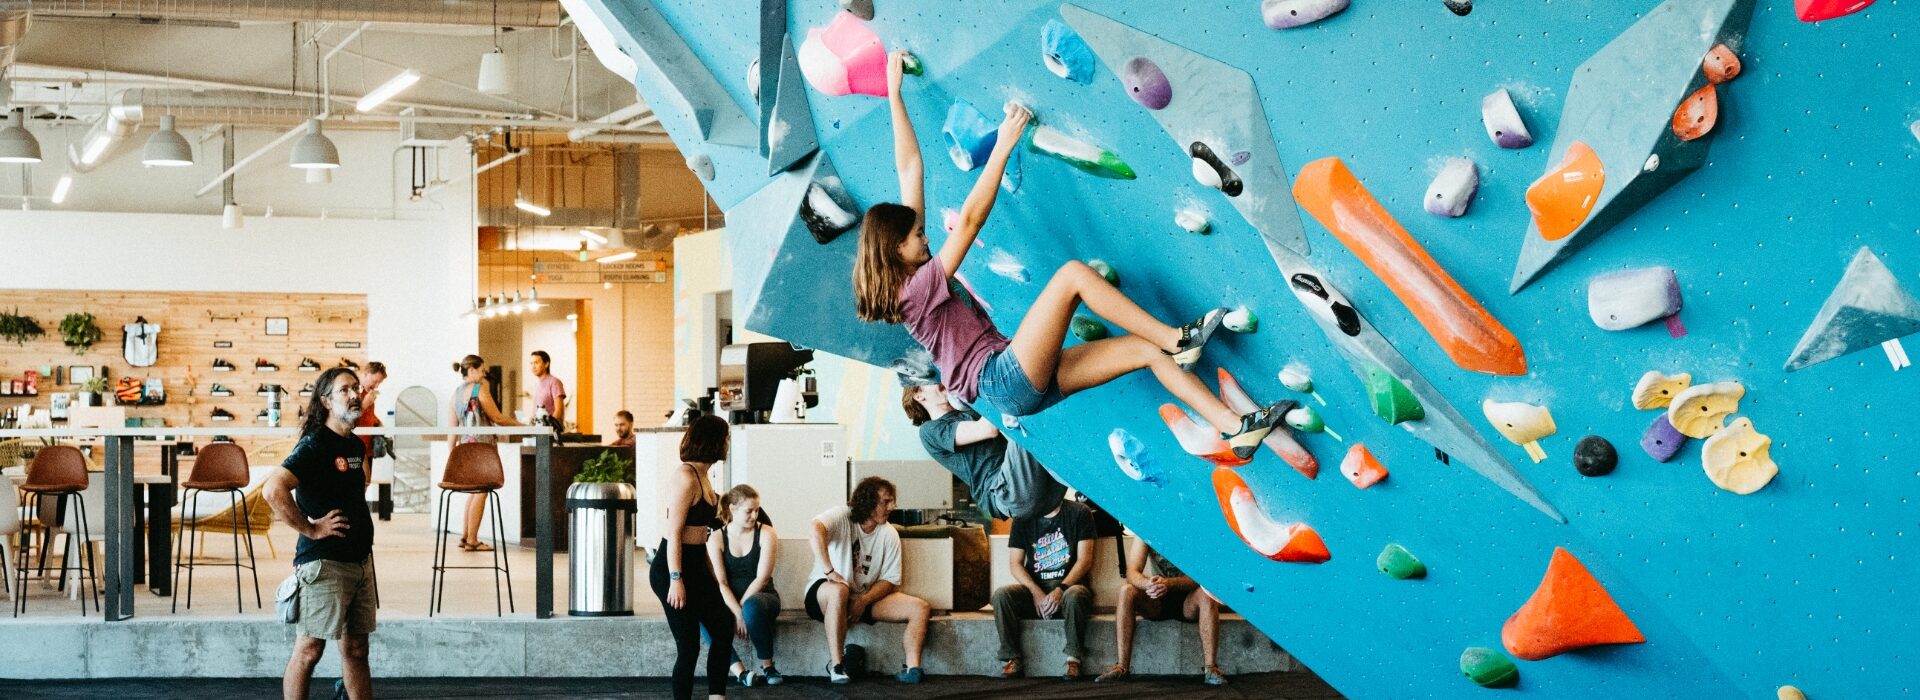 What you Need to Know for your First Visit - Bouldering Project